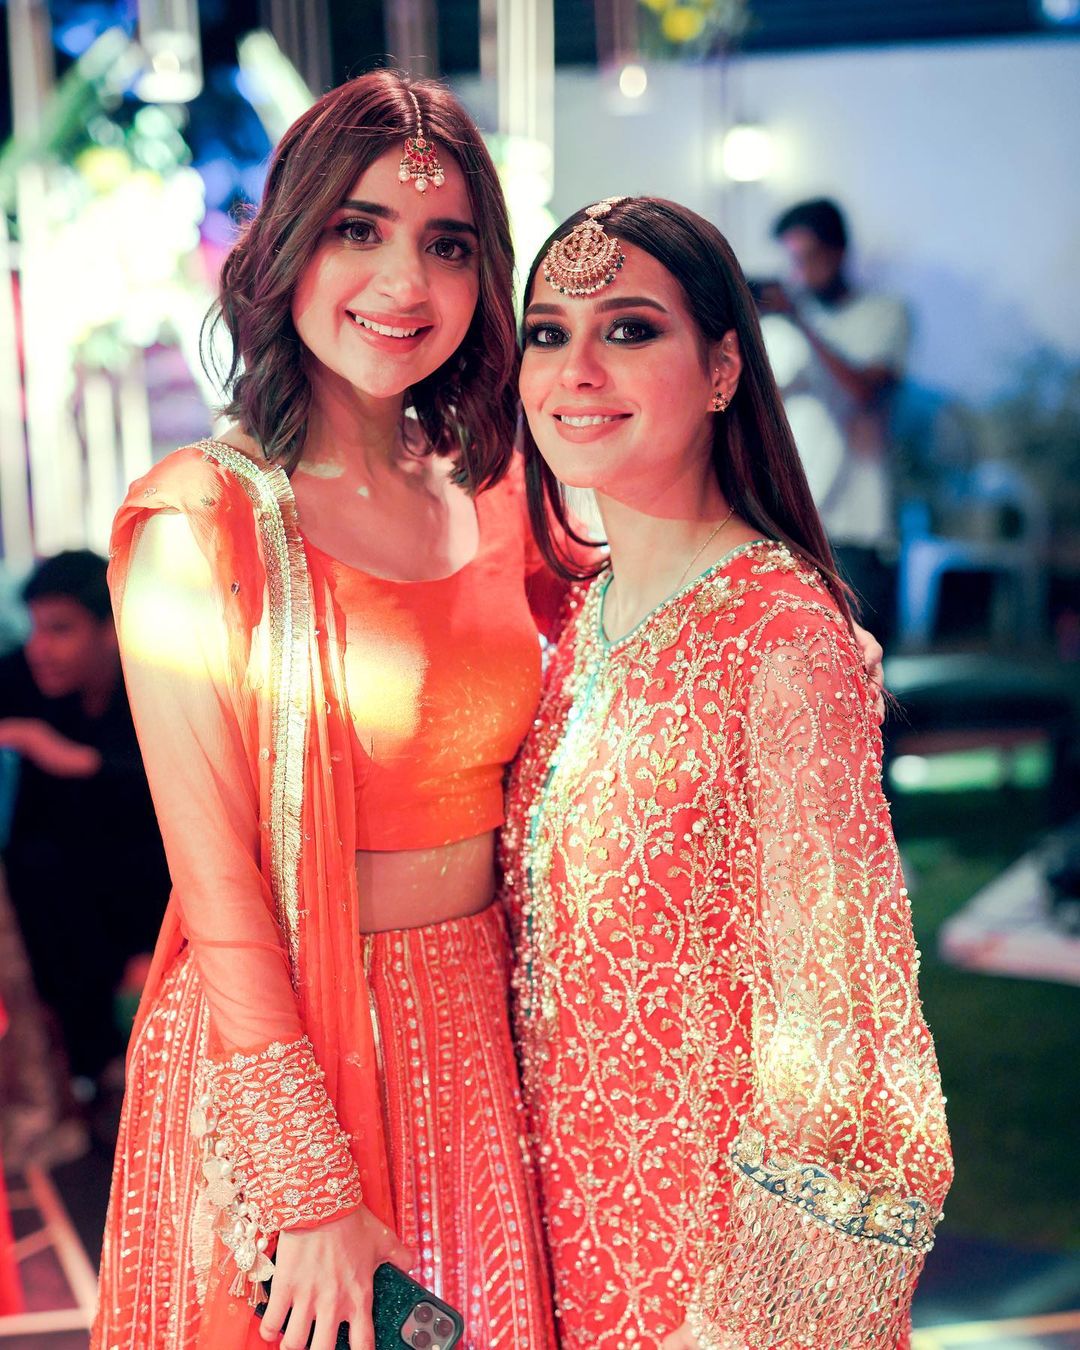 Beautiful Pictures of Celebrities from Mehndi Event of Umair Qazi